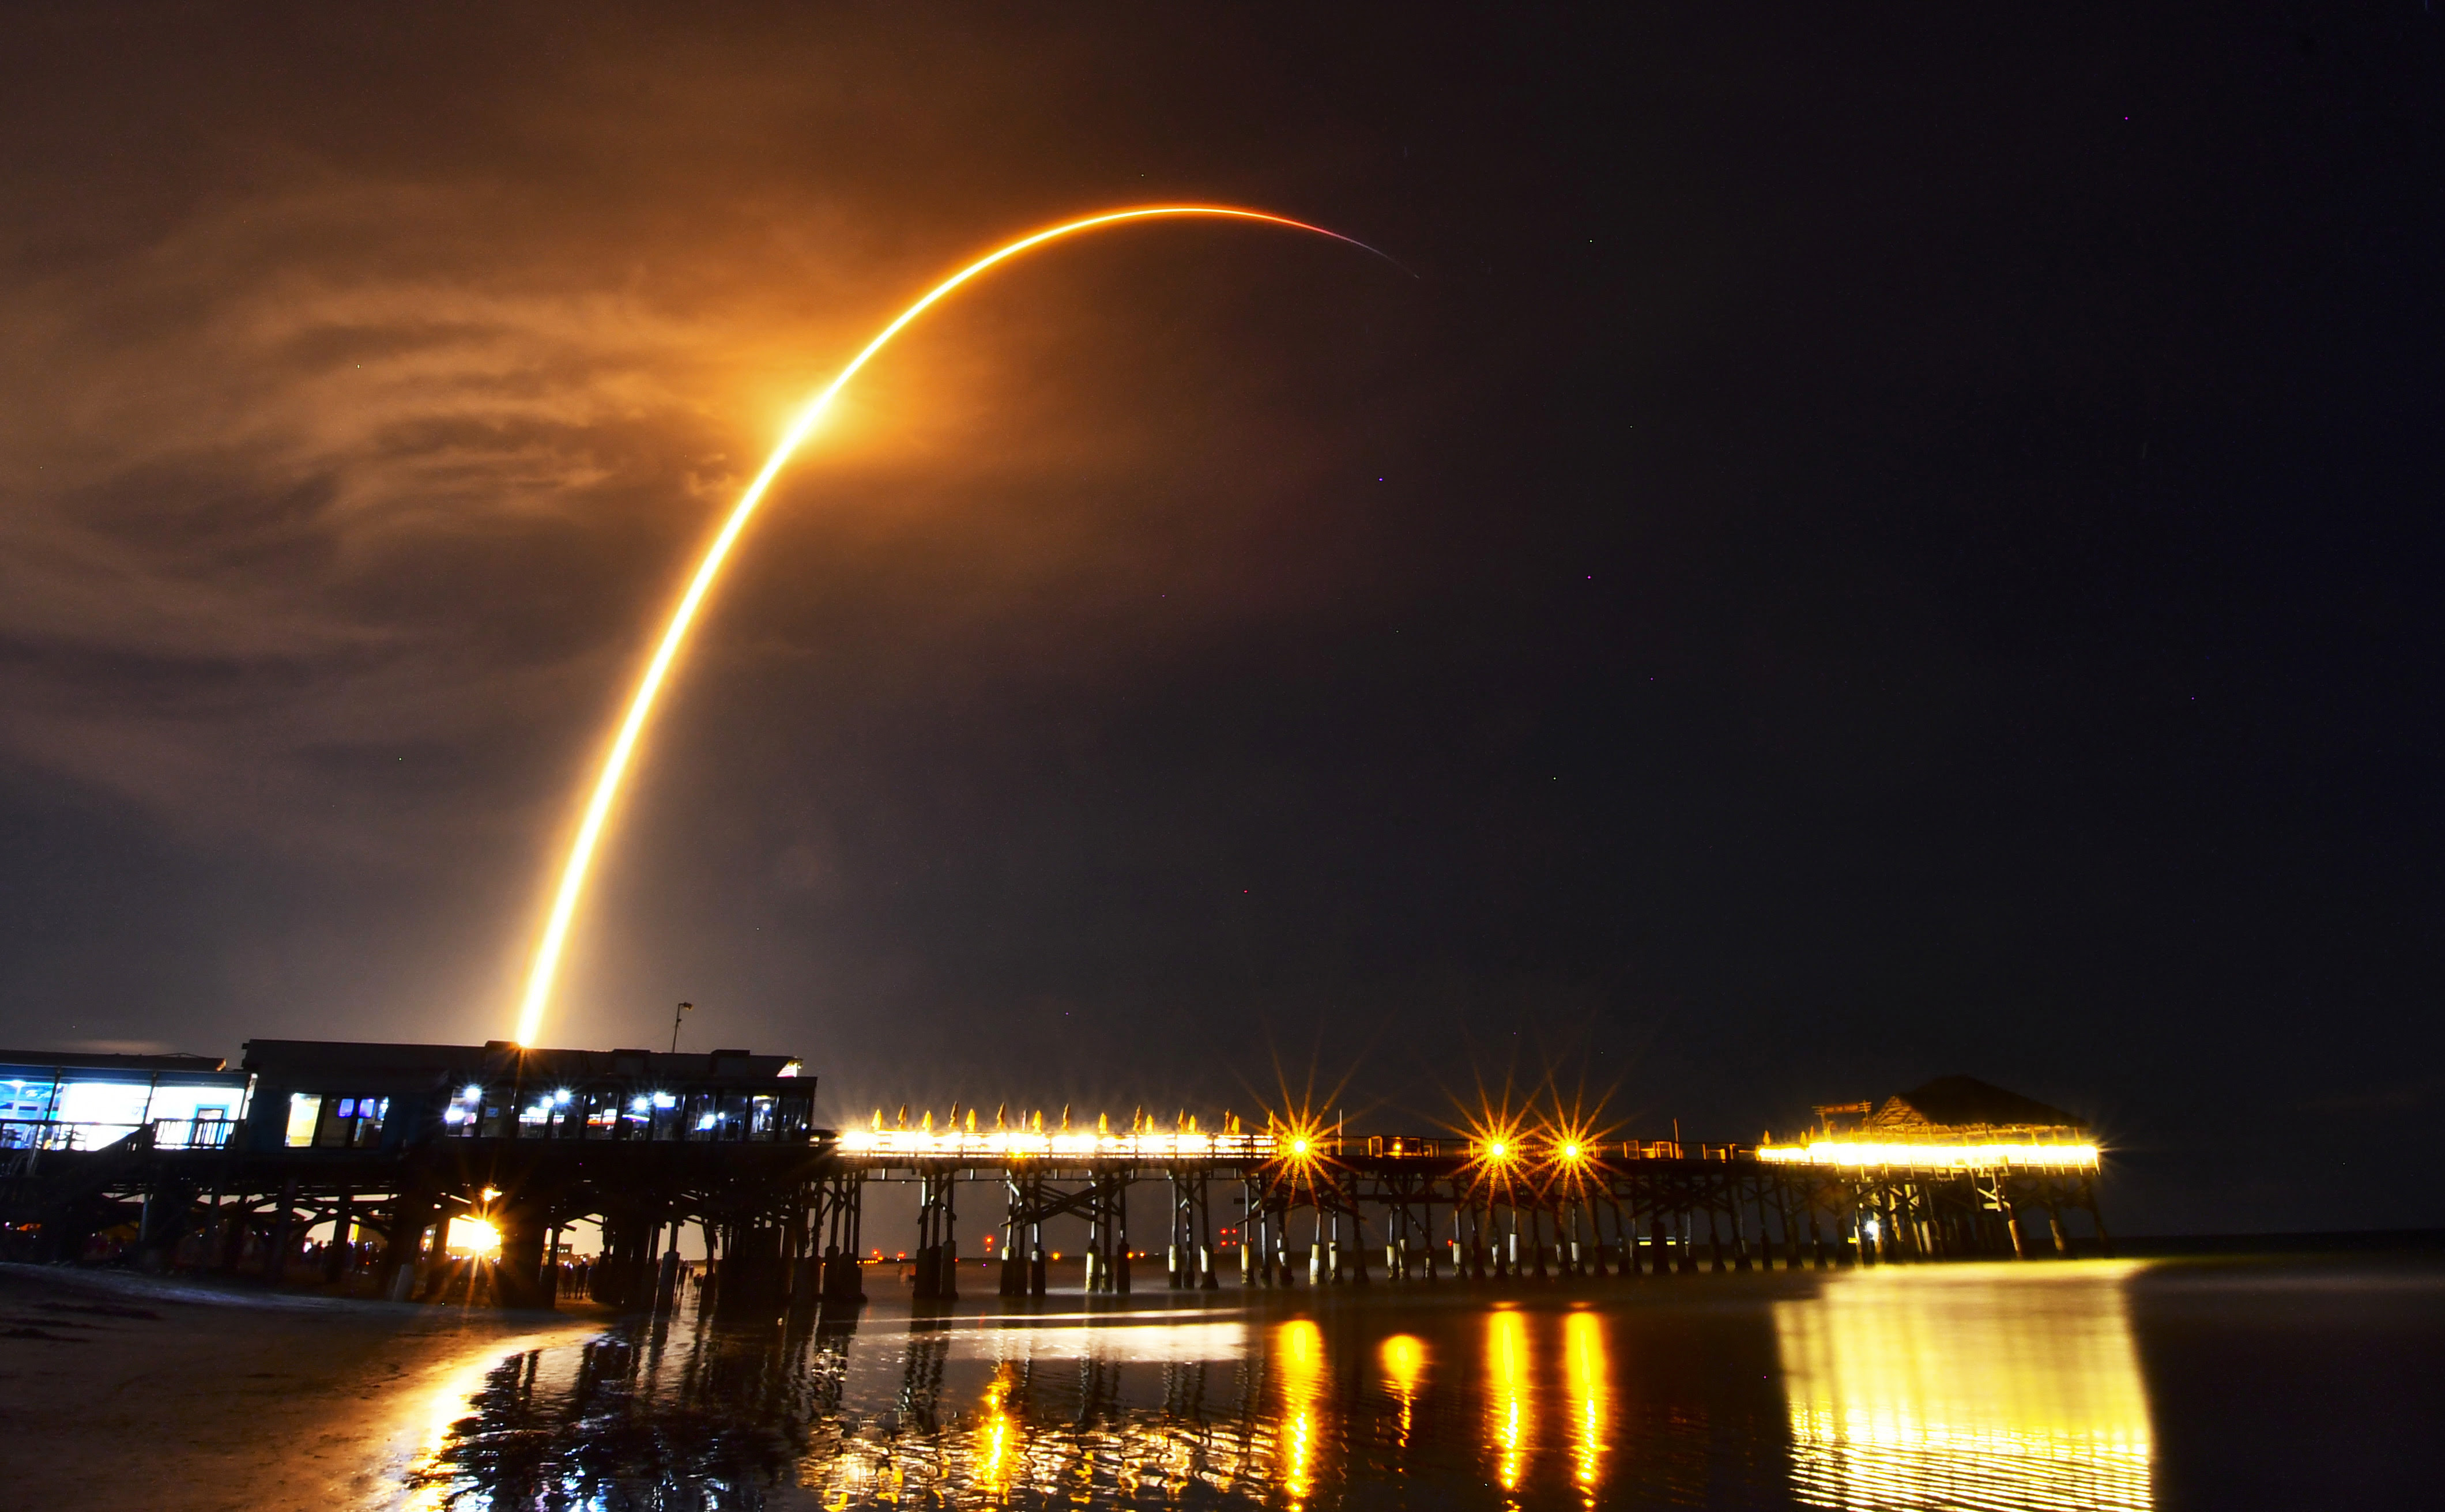 A SpaceX Falcon 9 rocket is pictured from Cocoa Beach, Fla,. as it launches from Launch Complex 40 at Cape Canaveral Space Force Station, Fla., Sunday, Sept., 4, 2022.